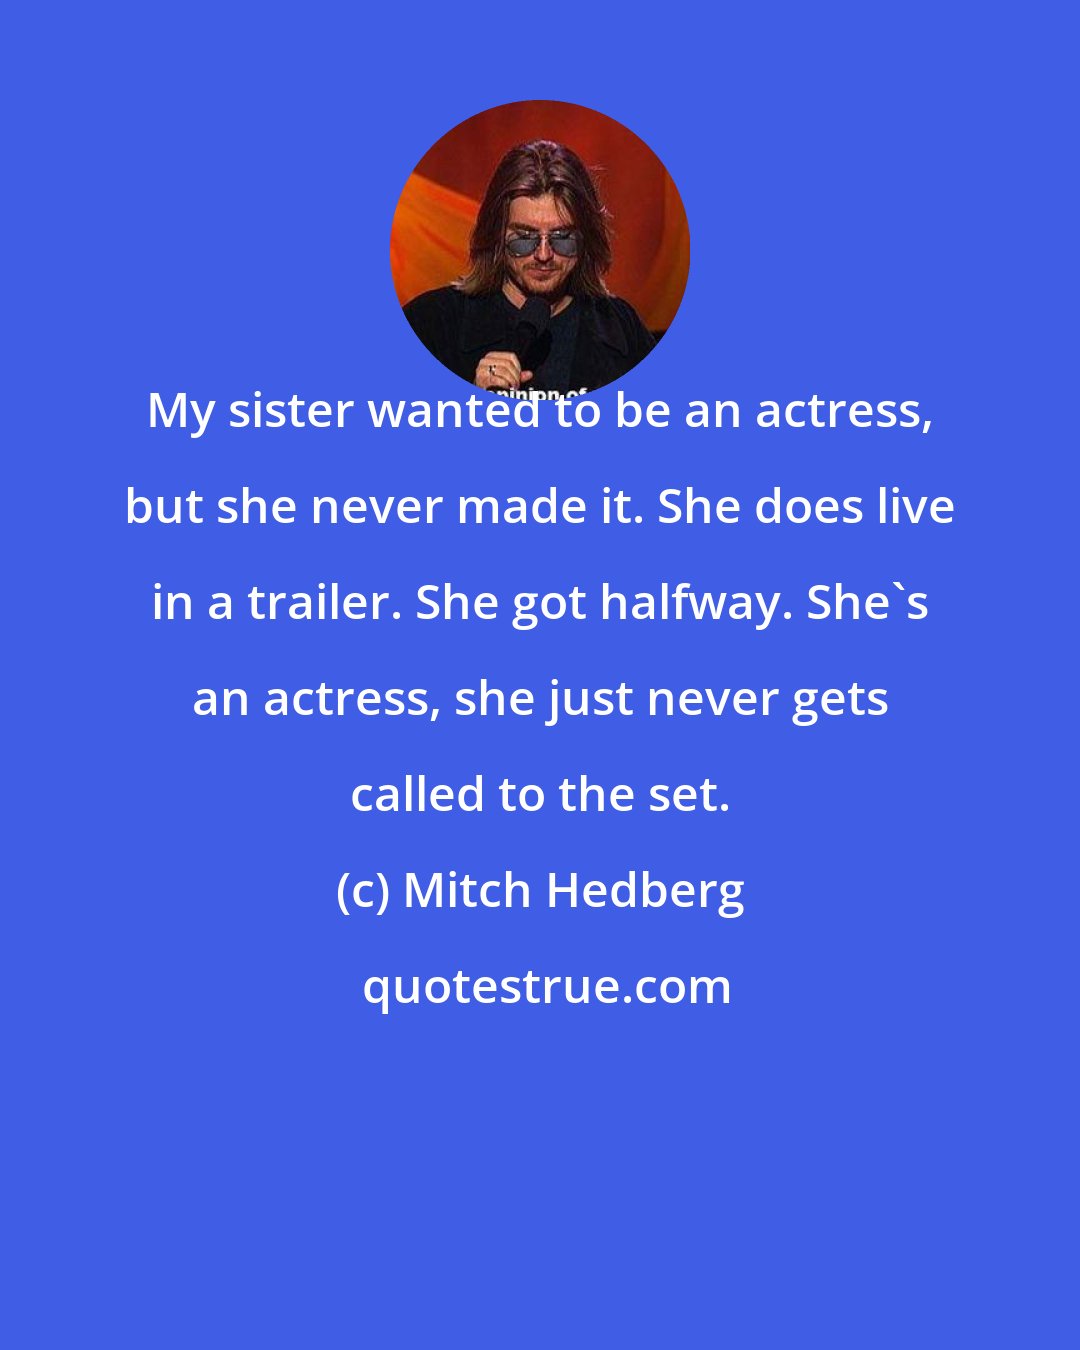 Mitch Hedberg: My sister wanted to be an actress, but she never made it. She does live in a trailer. She got halfway. She's an actress, she just never gets called to the set.